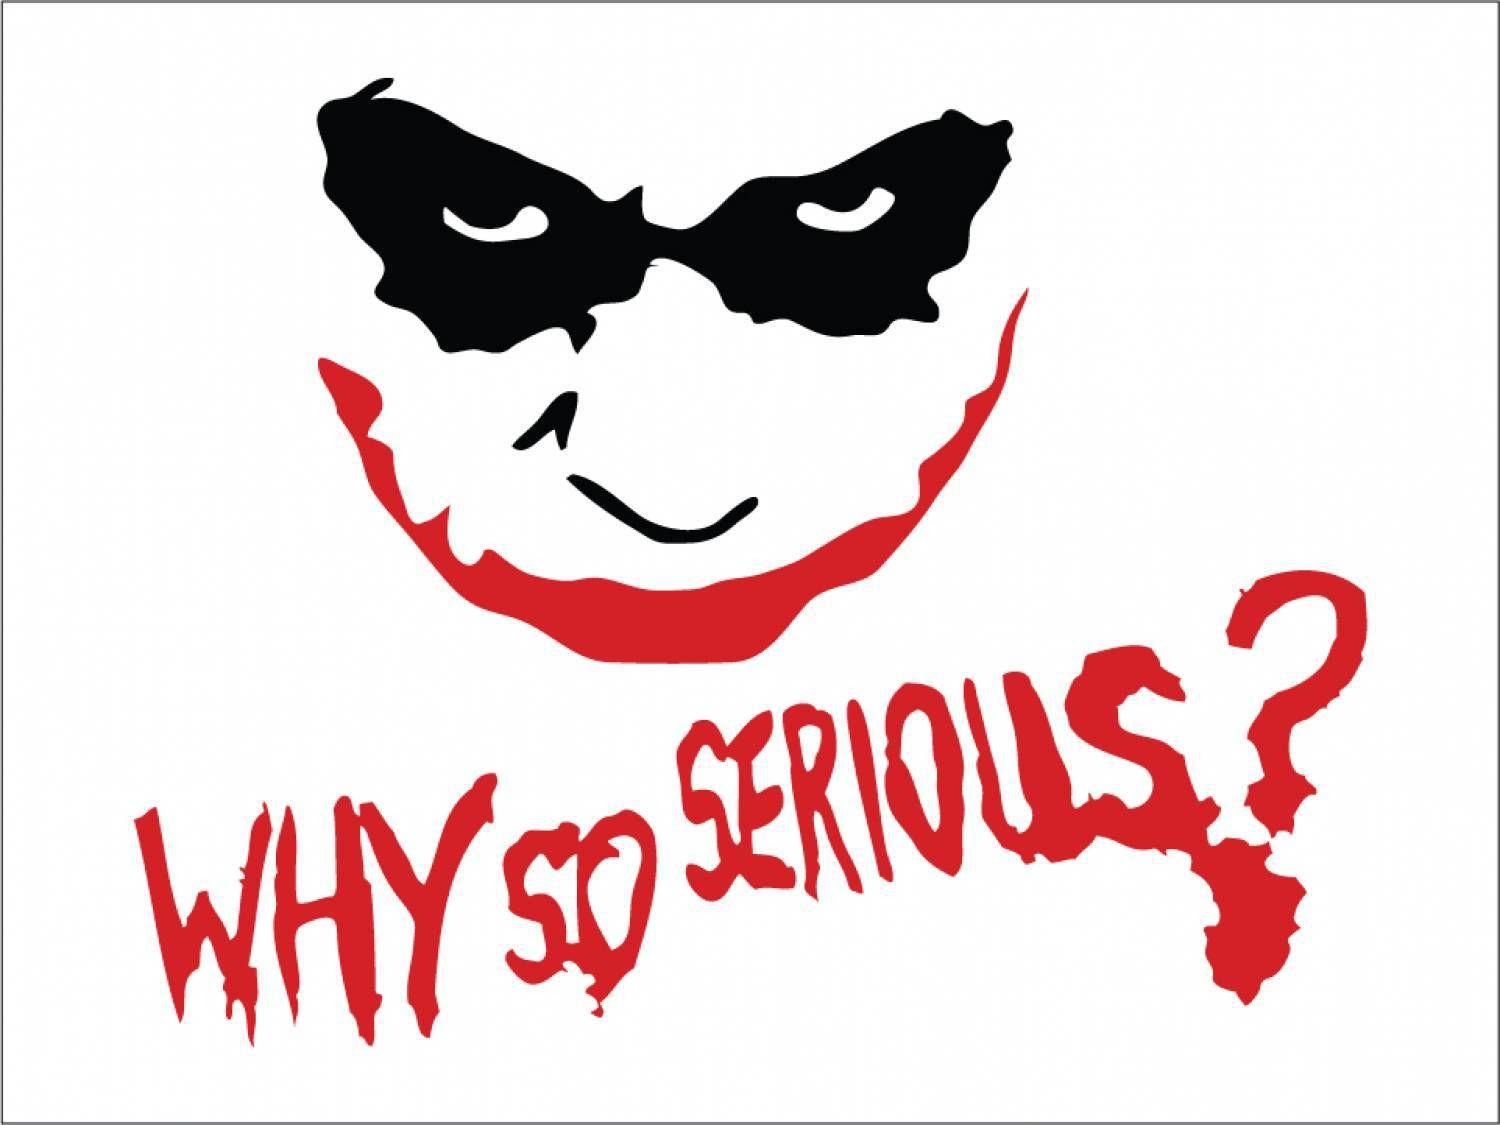 IPhone Why so serious Wallpaper HD Desktop Background. Art